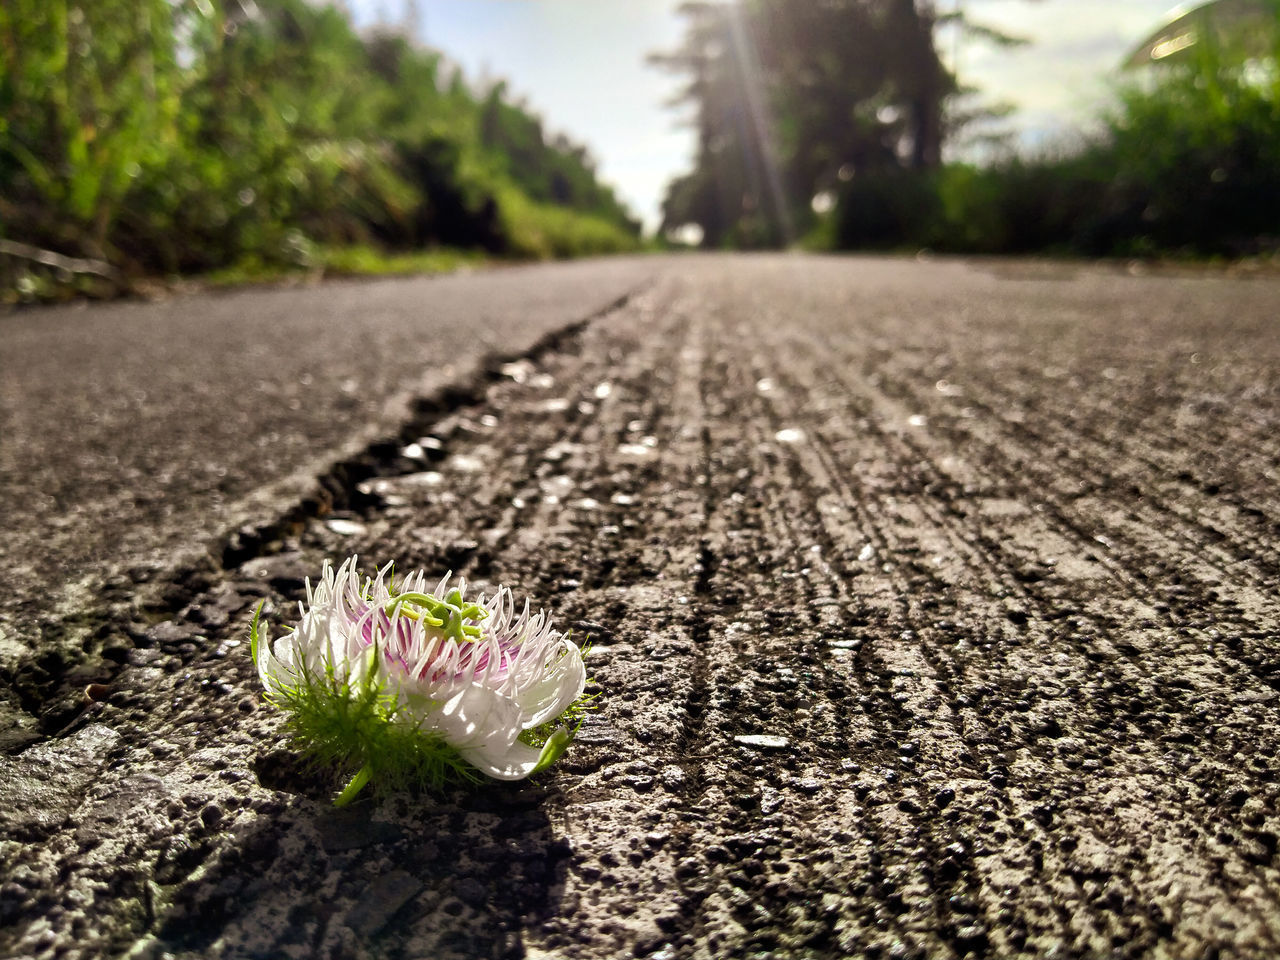 CLOSE-UP OF WHITE FLOWER ON ROAD